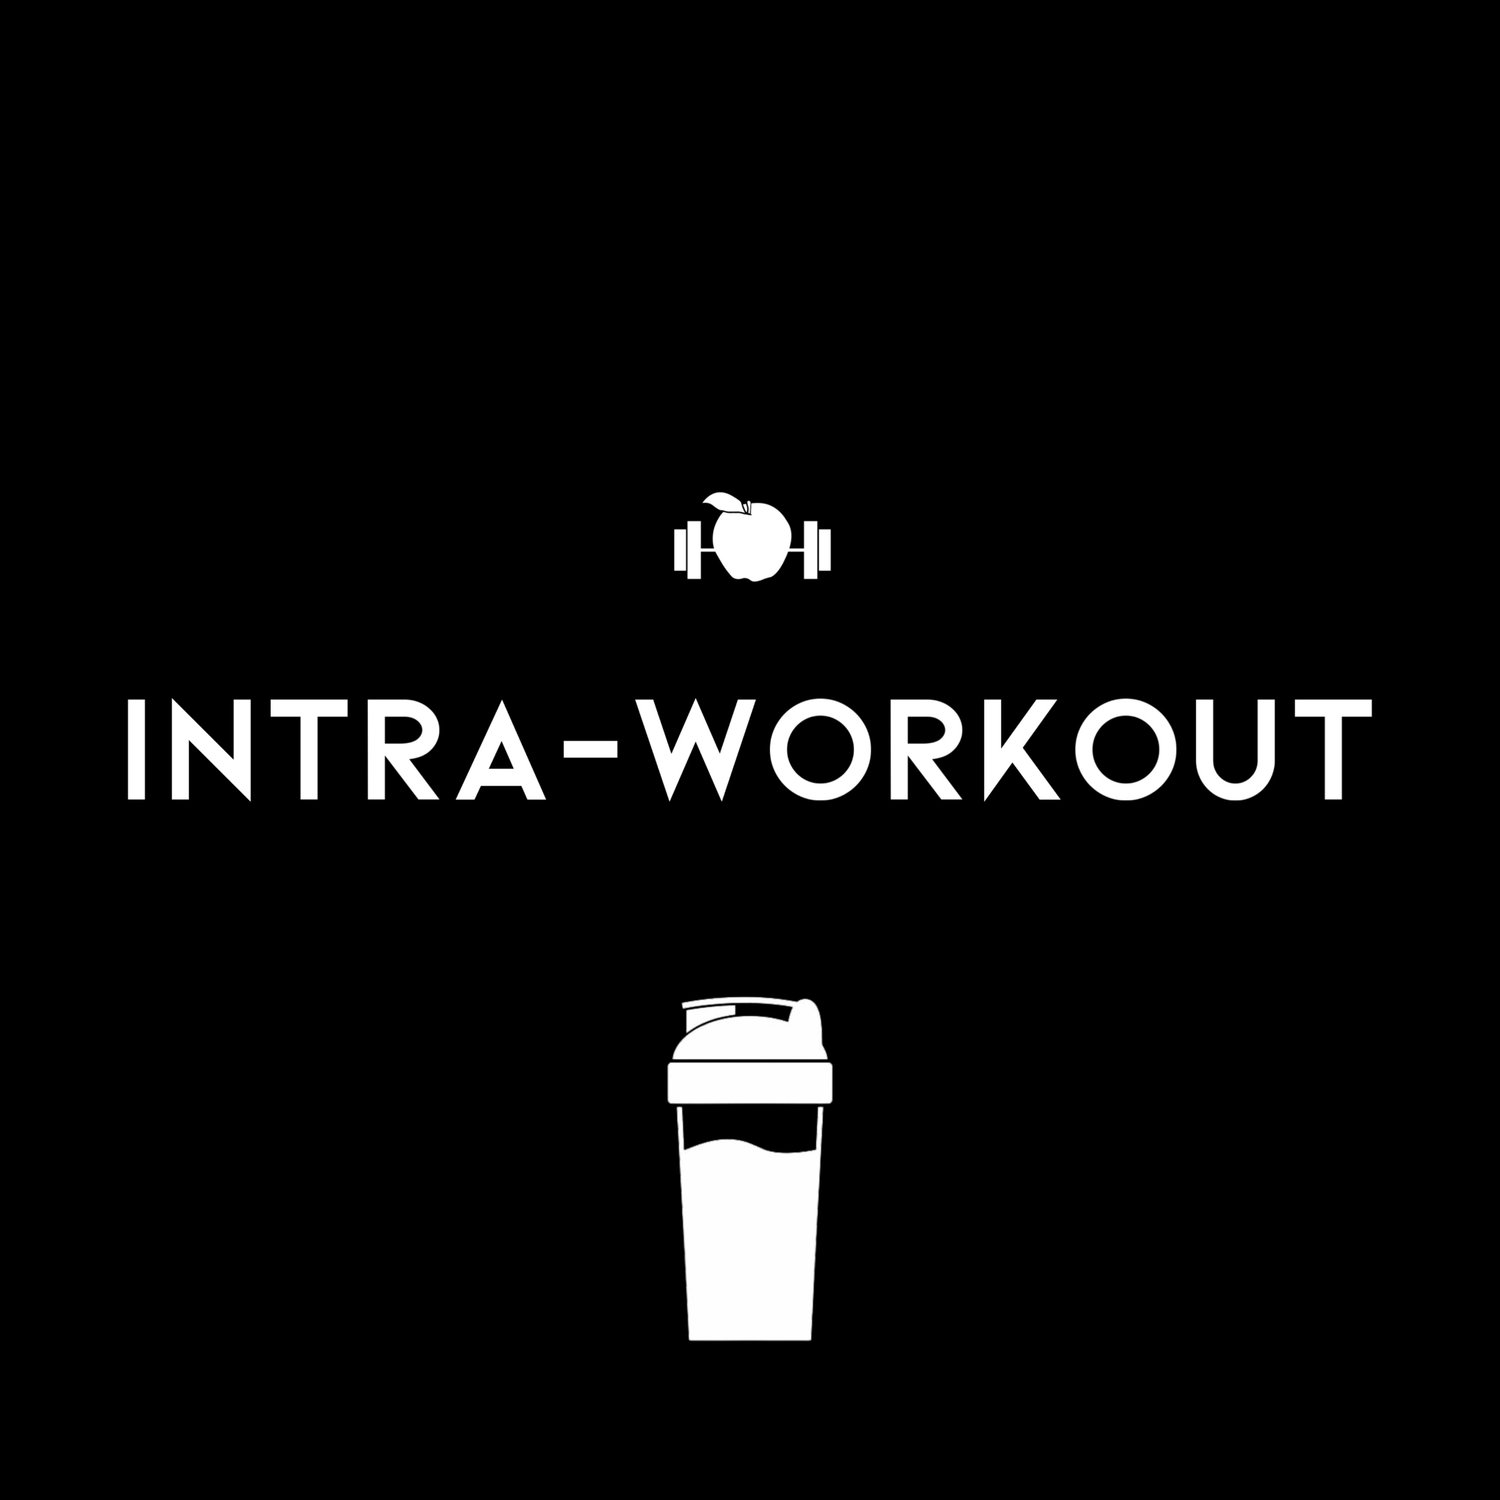 Intra-workout & EAAS